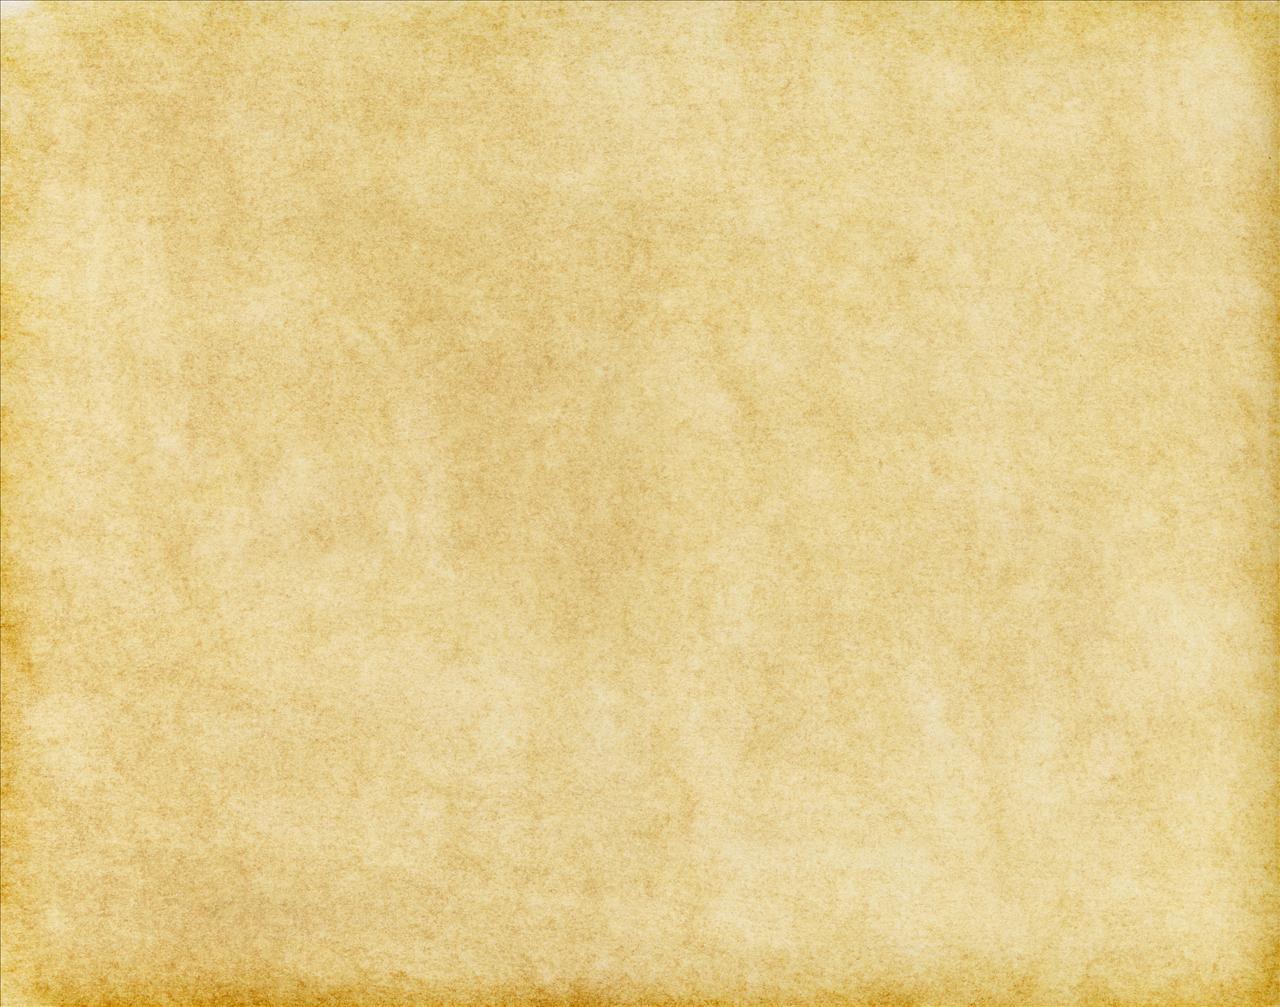 texture paper, paper texture, old battered paper, download photo